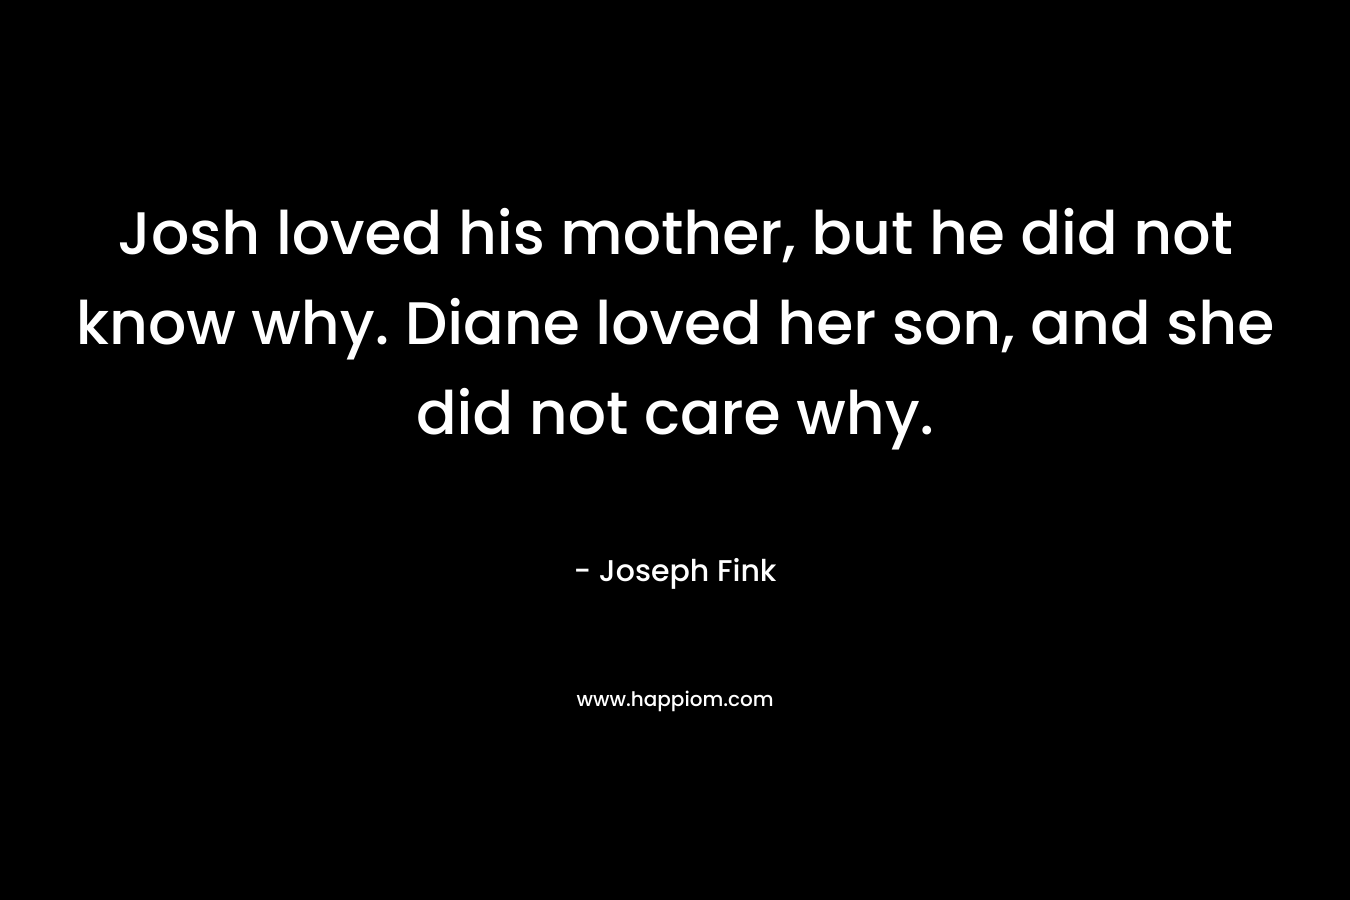 Josh loved his mother, but he did not know why. Diane loved her son, and she did not care why.